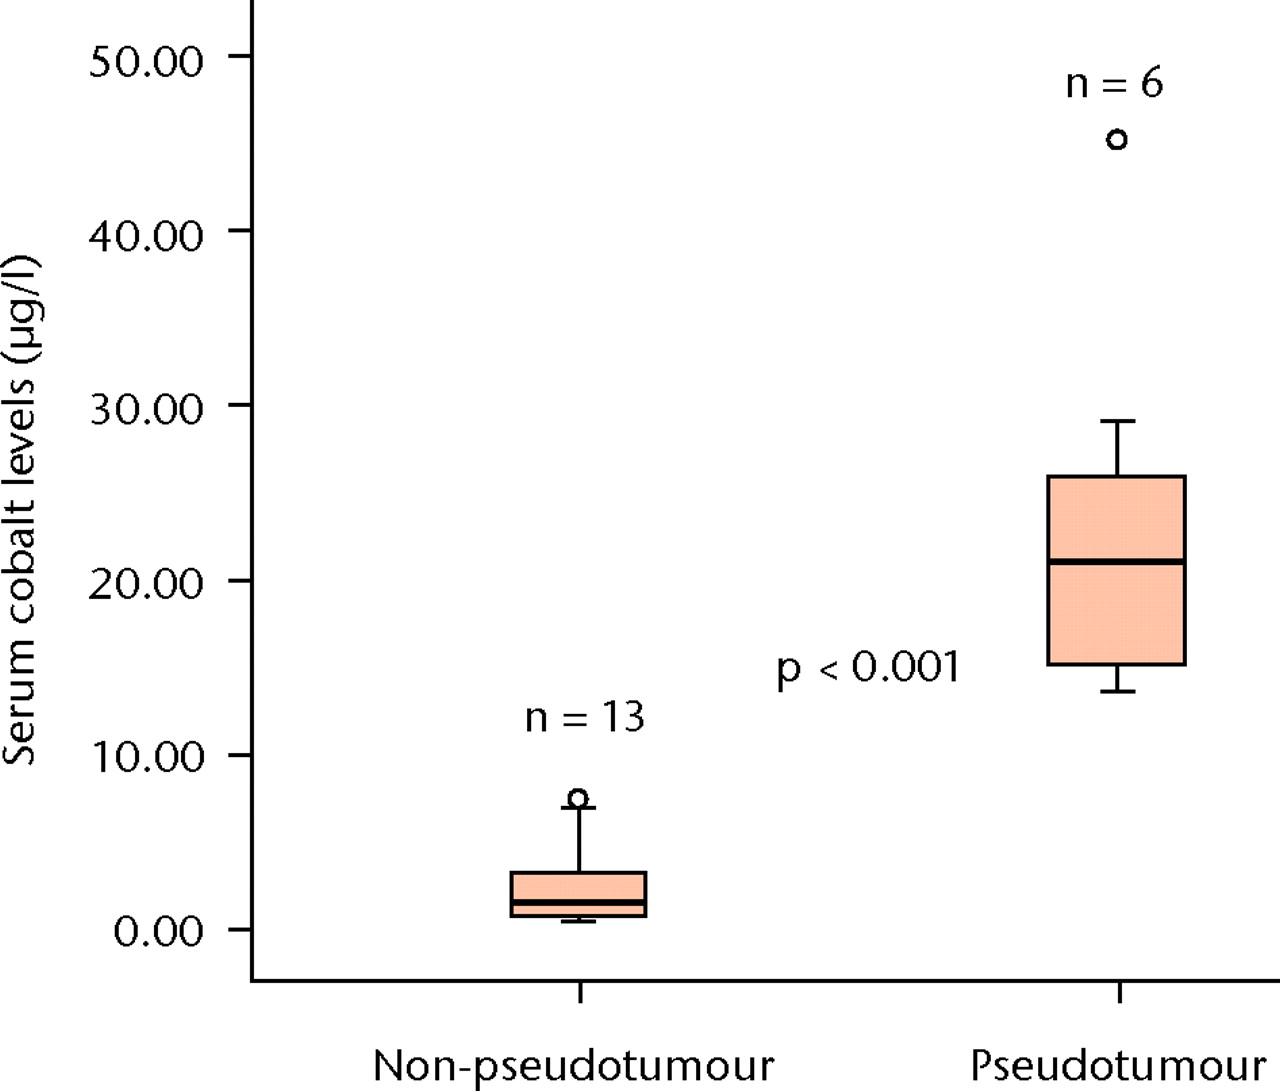 Figs. 6a - 6b 
            Boxplots showing the median serum
cobalt (Co) (a) and chromium (Cr) (b) level measurements in the
six patients with psuedotumour and the 13 patients without. The
boxes represent the median and interquartile range, and the whiskers
denote the range of data excluding outliers (°, between 1.5 and
3×IQR) and extremes (*, >
 3×IQR).
          